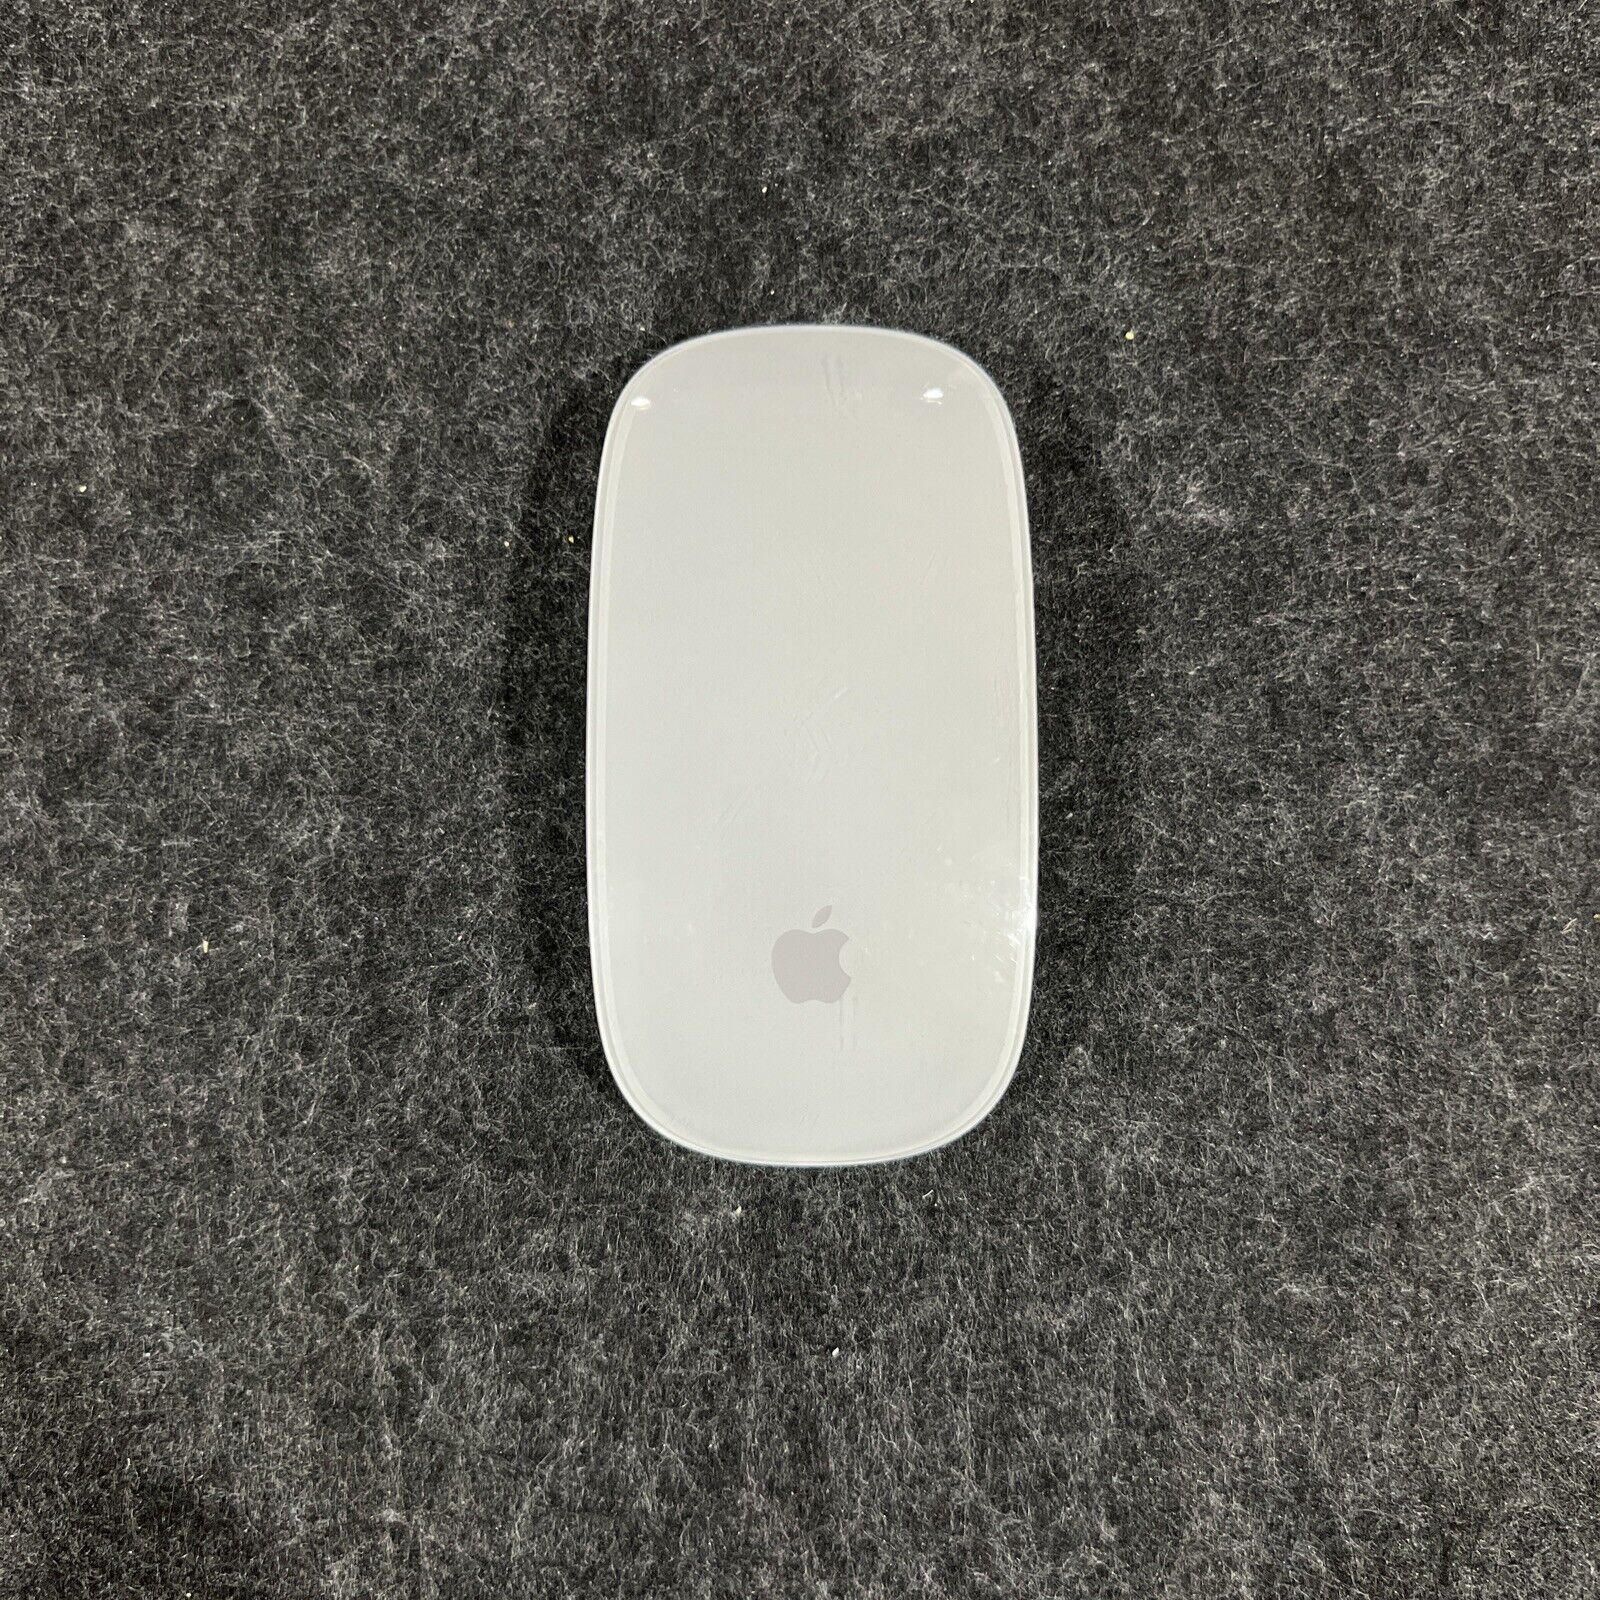 Apple Magic Mouse 2 Wireless Mouse - Silver - Used